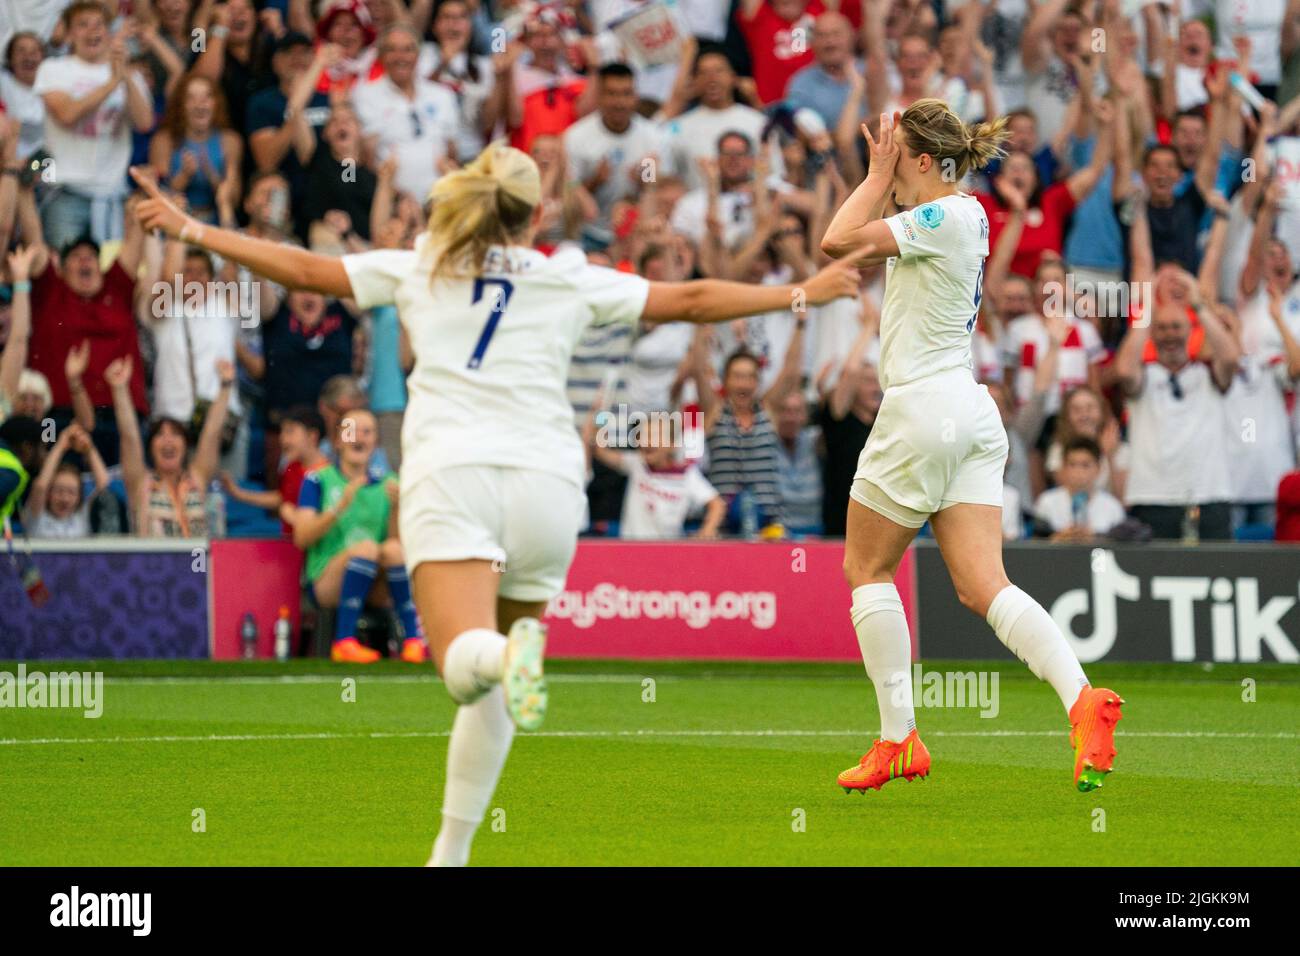 Brighton, UK. 11th July, 2022. Ellen White (9 England) scores Englands third (3-0) during the UEFA Womens Euro 2022 football match between England and Norway at the Community Stadium in Brighton, England. (Foto: Sam Mallia/Sports Press Photo/C -  - Alamy) Credit: SPP Sport Press Photo. /Alamy Live News Stock Photo